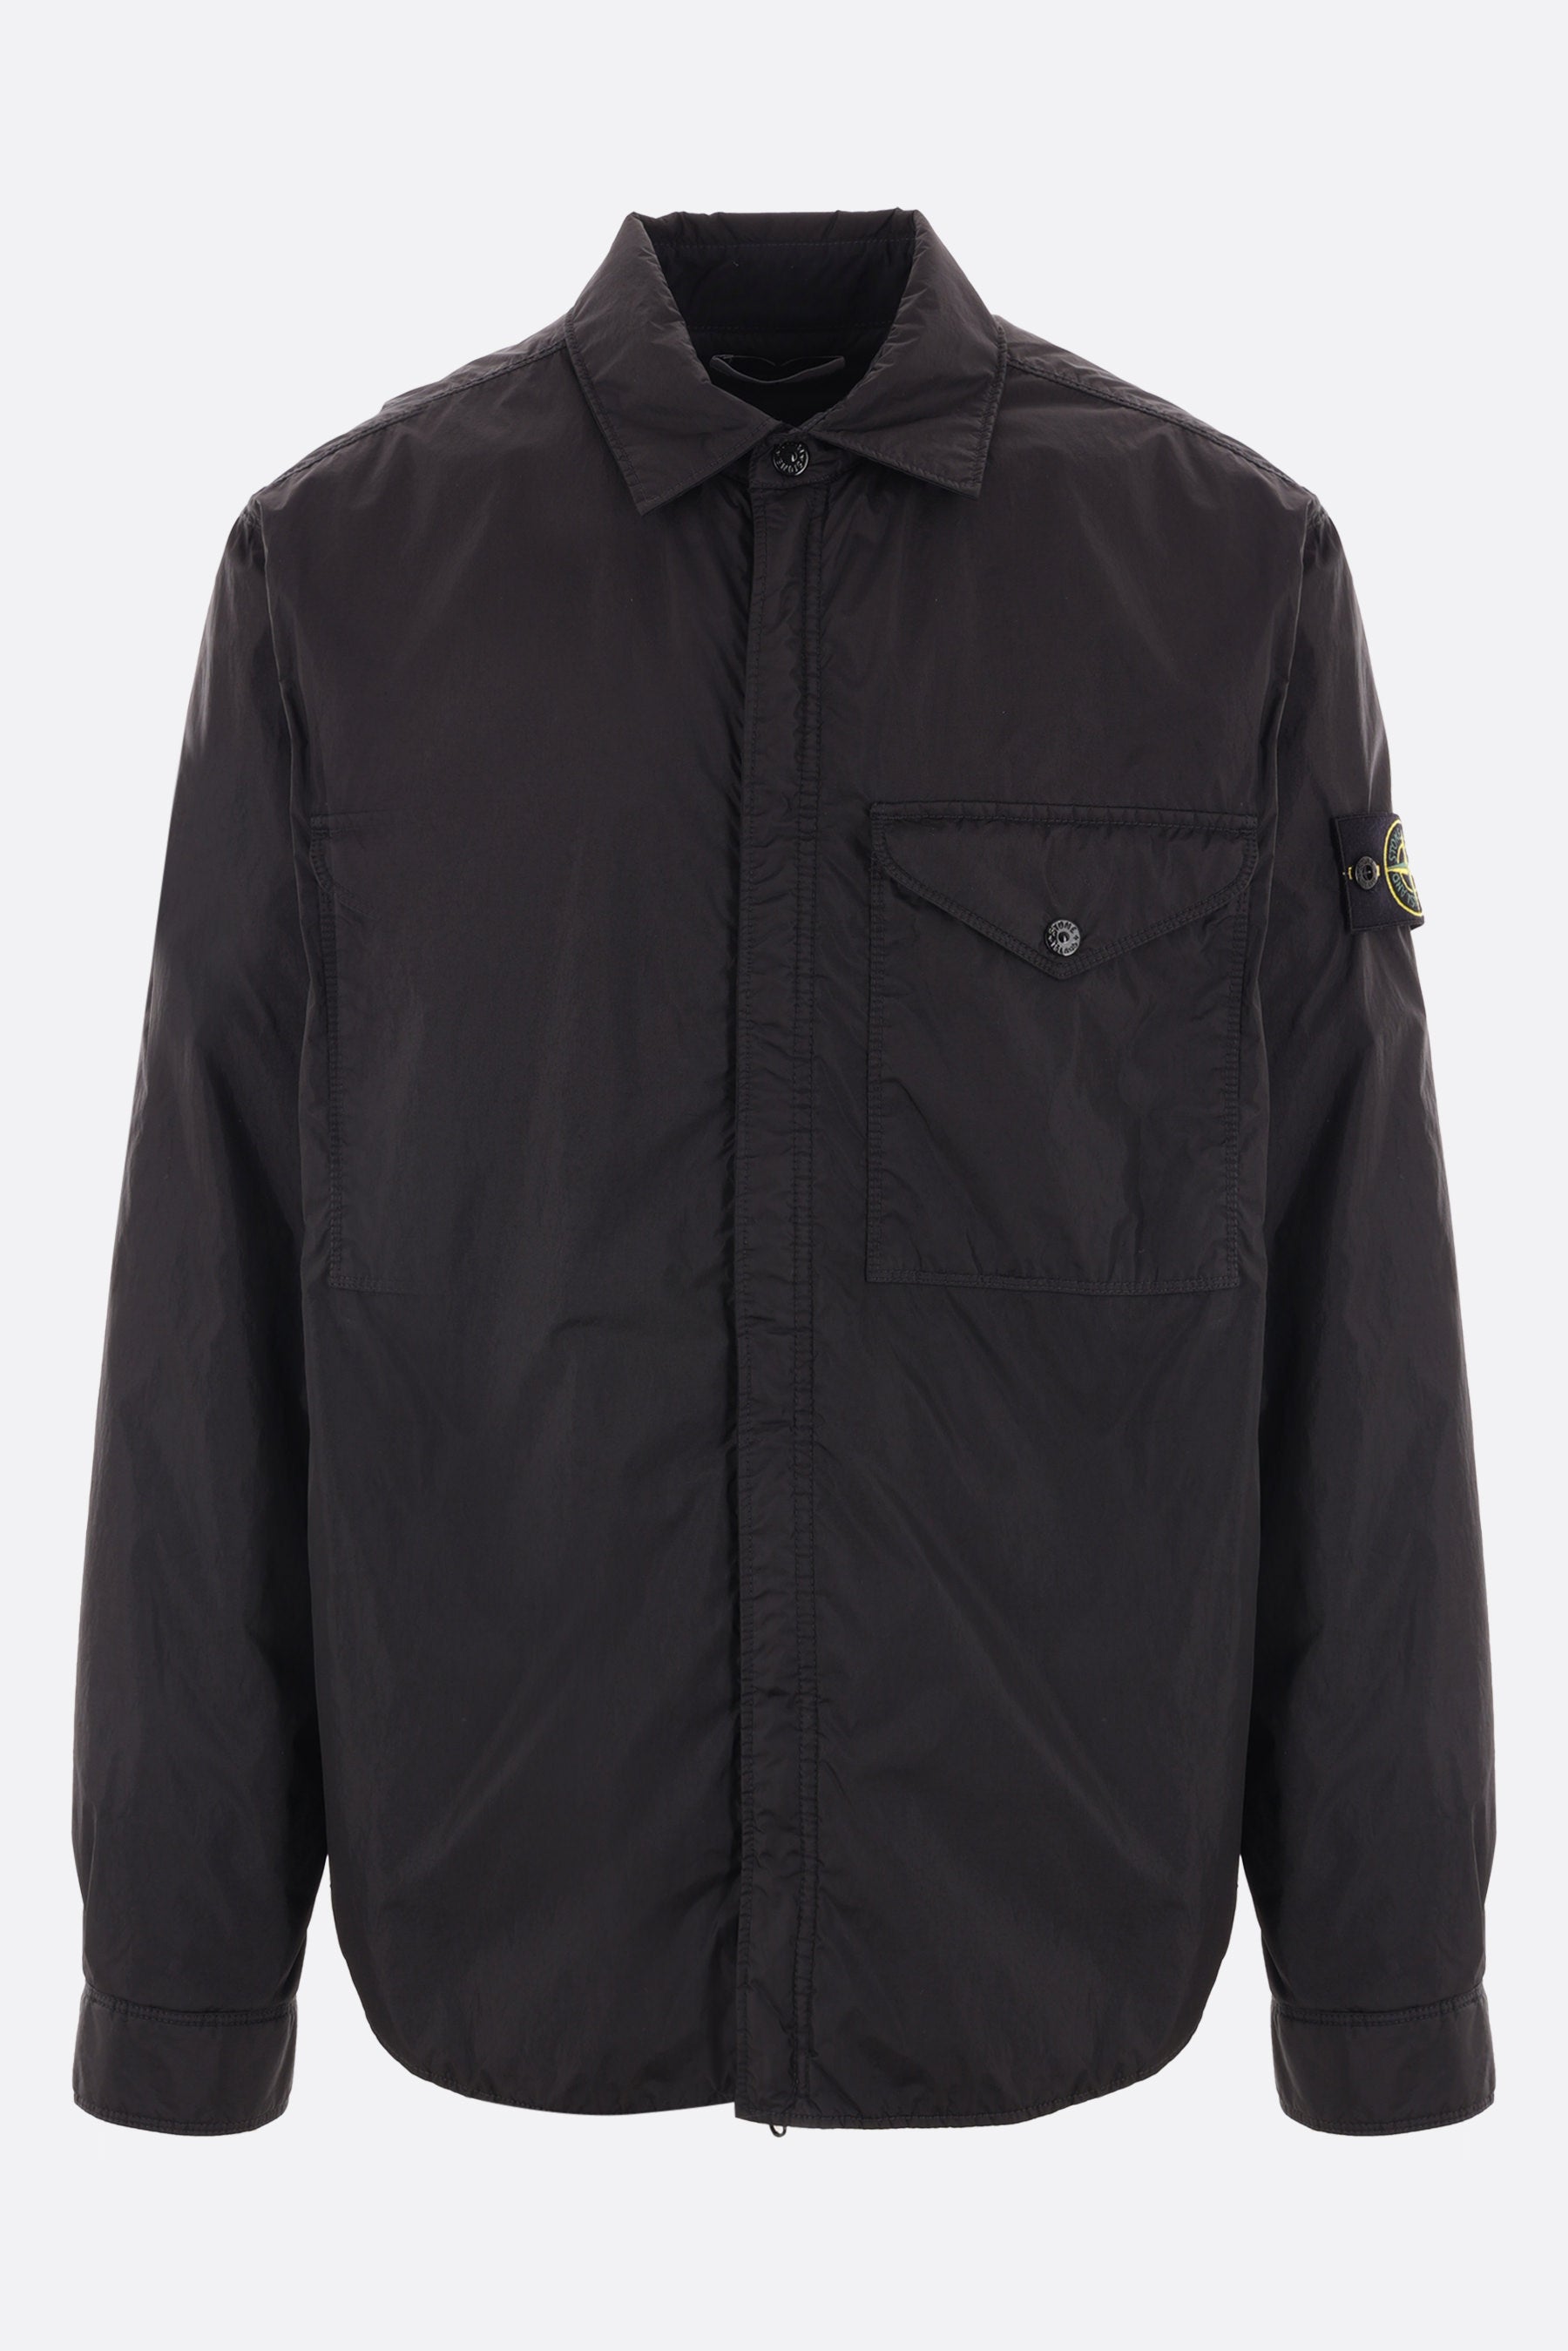 Crinkle Reps R-NY padded overshirt